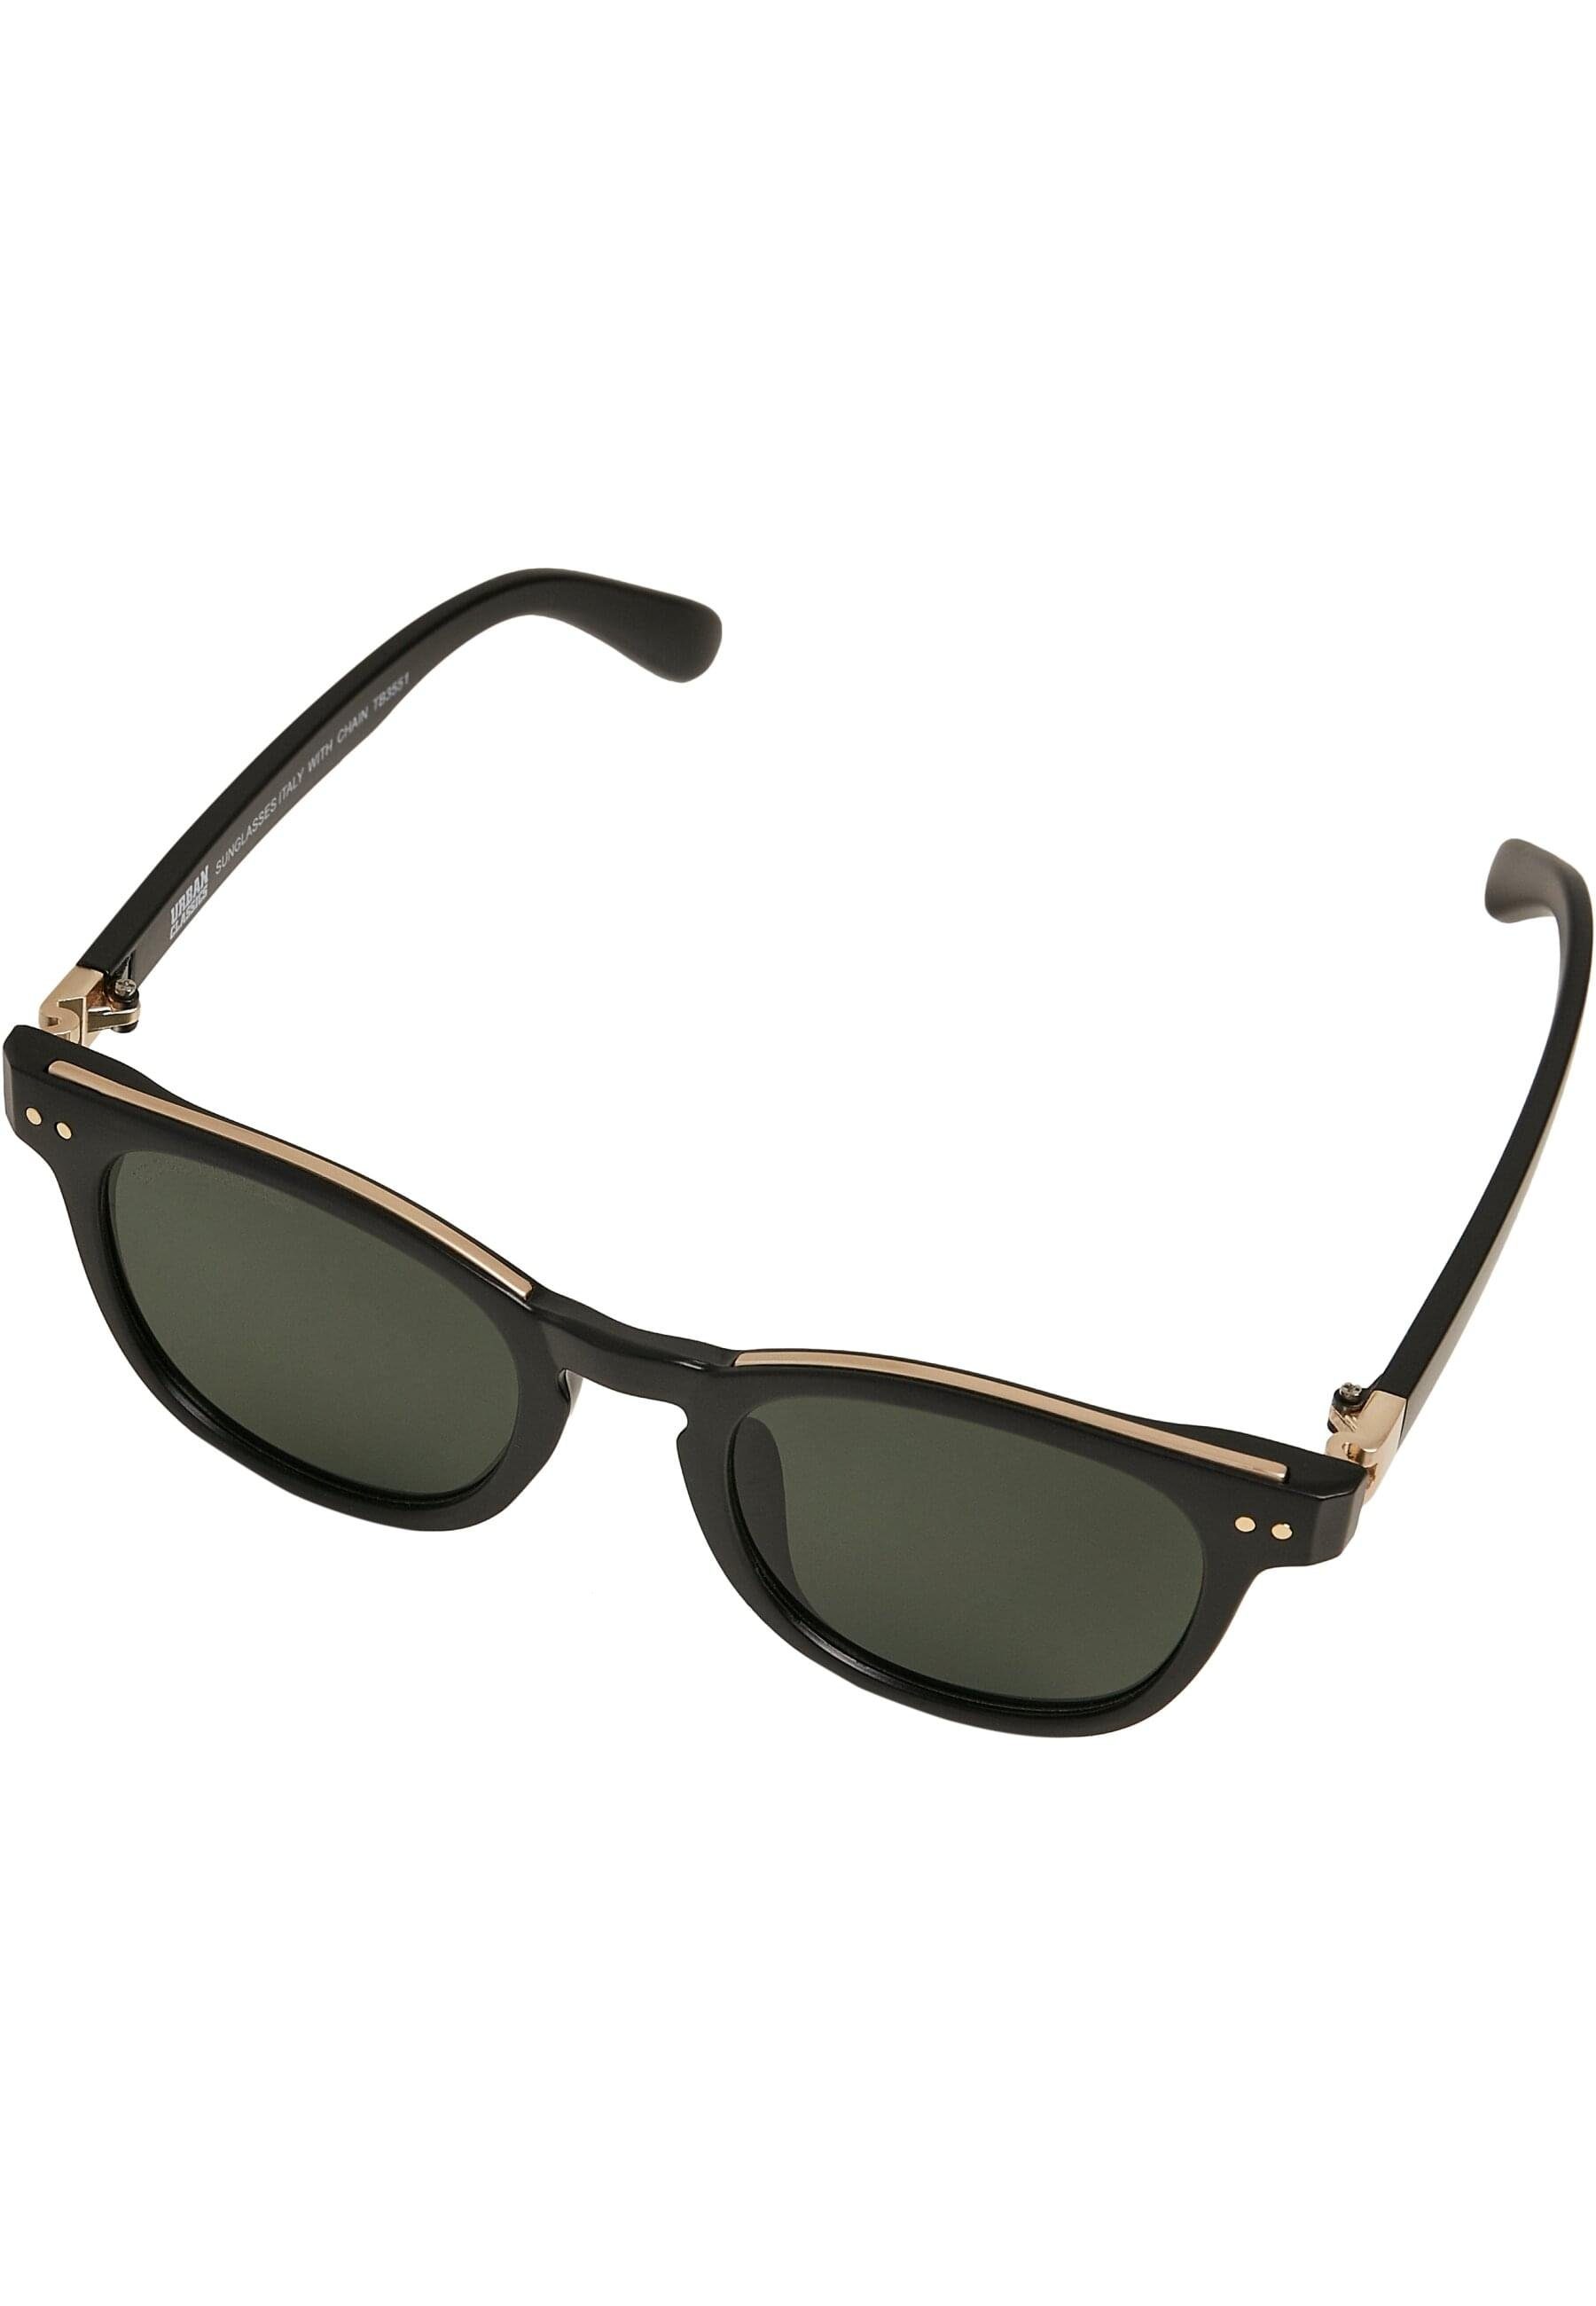 URBAN black/gold/gold with Italy Sunglasses Sonnenbrille Unisex chain CLASSICS